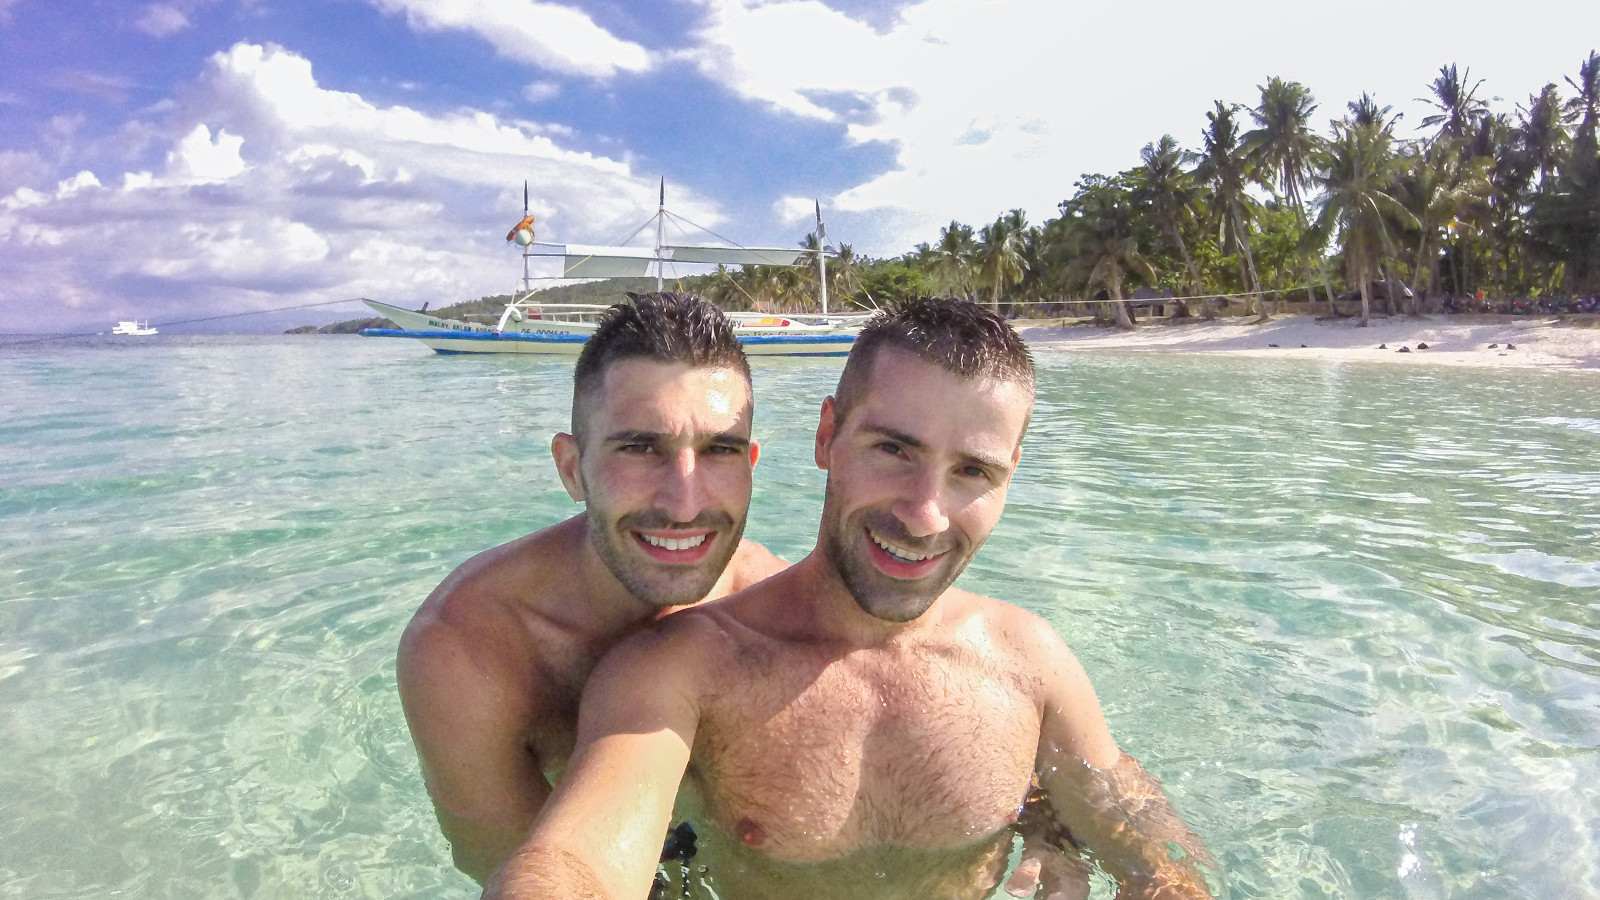 Nomadic boys chilling on Boracay island, a great getaway for gay couples